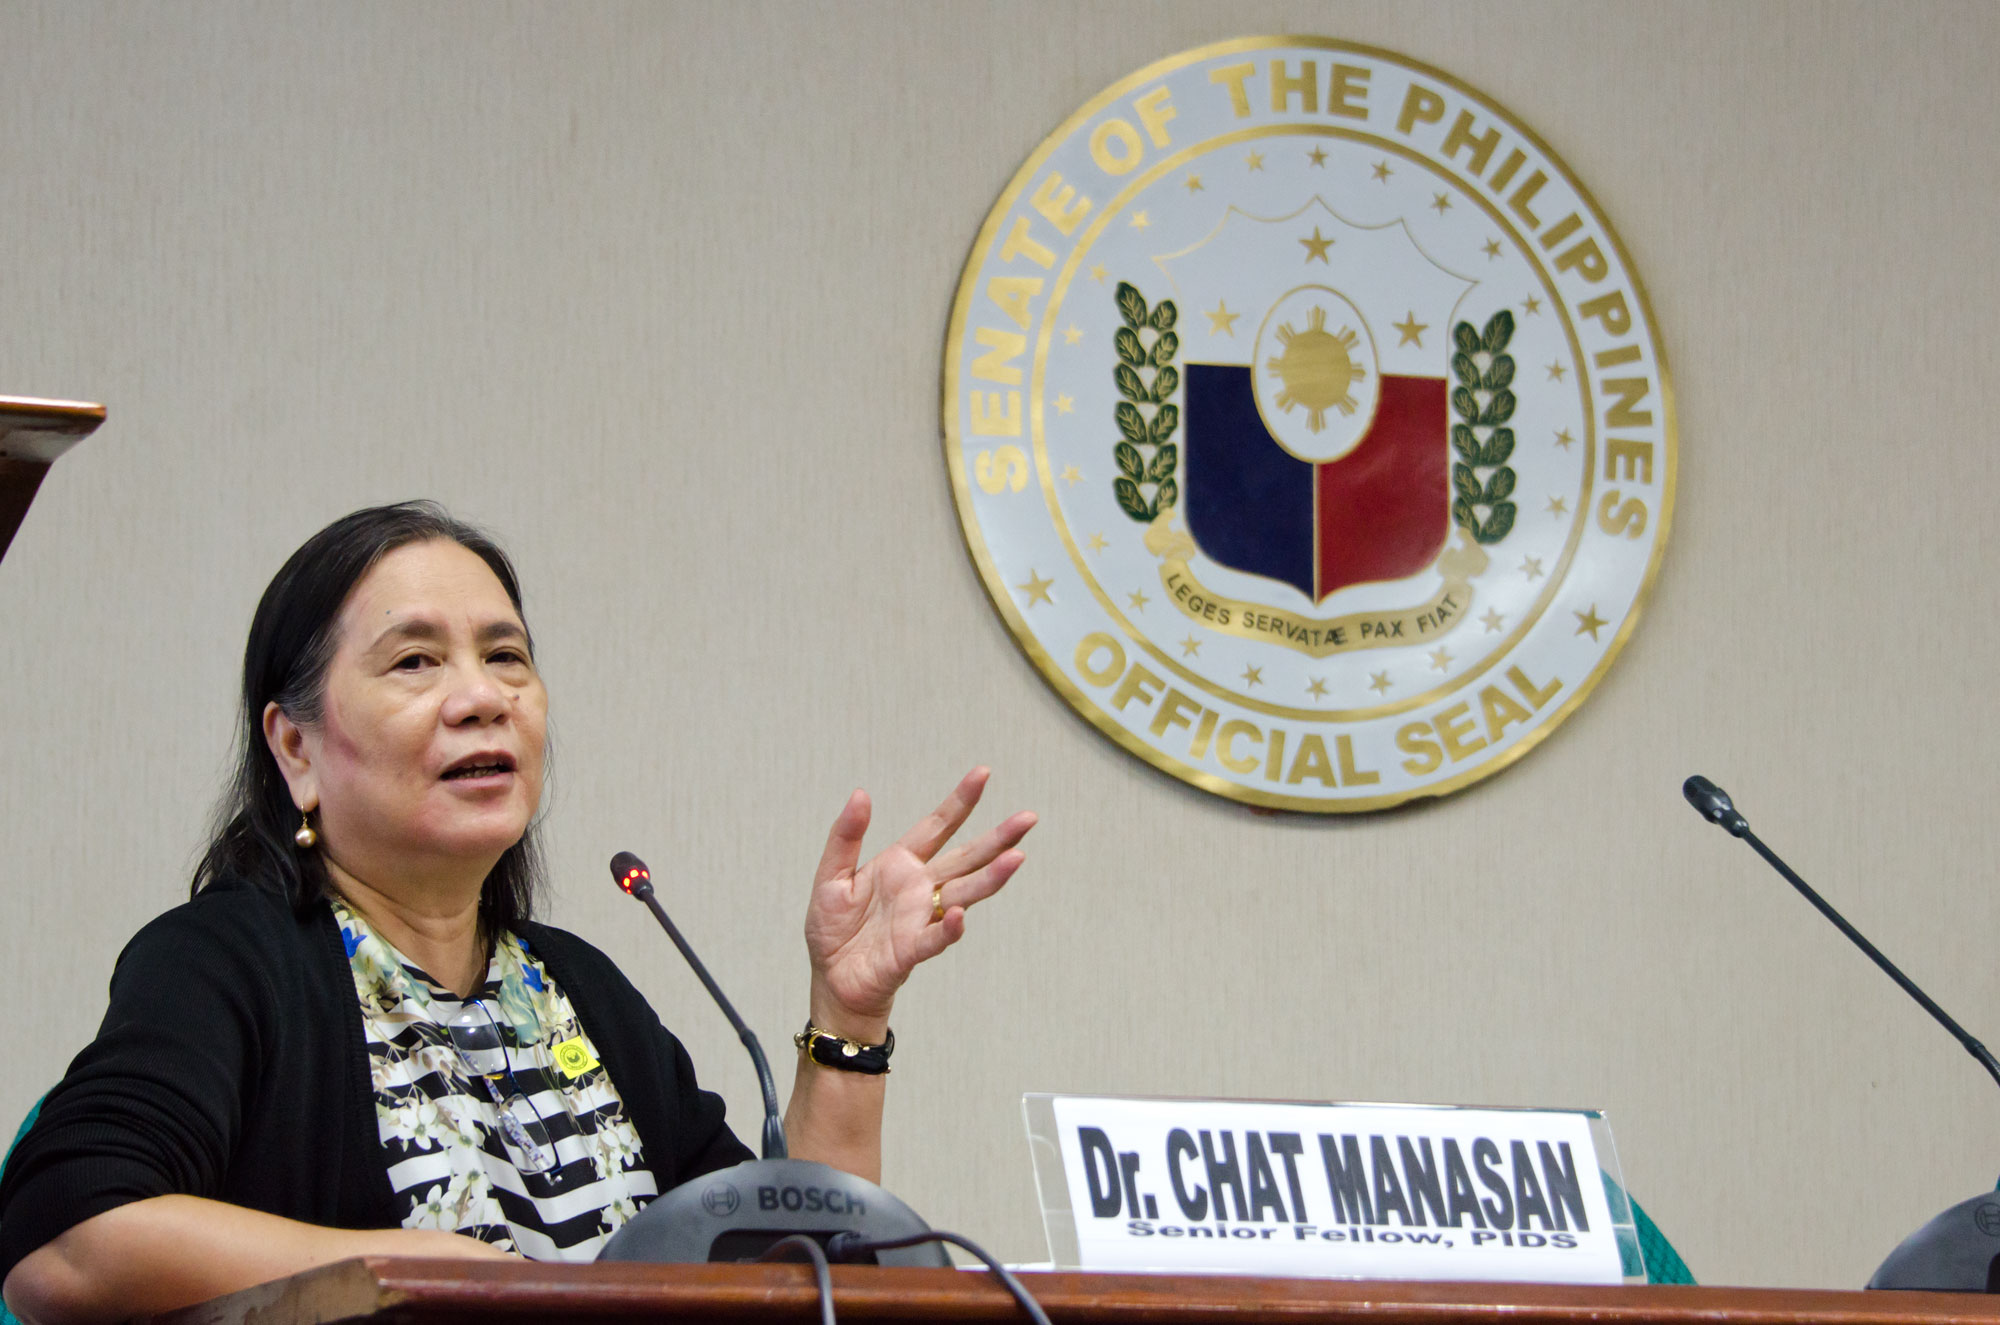 Senate Centennial Lecture Series Assessment Of The Bottom-Up Budgeting Process For FY 2015-GGM_7938.jpg